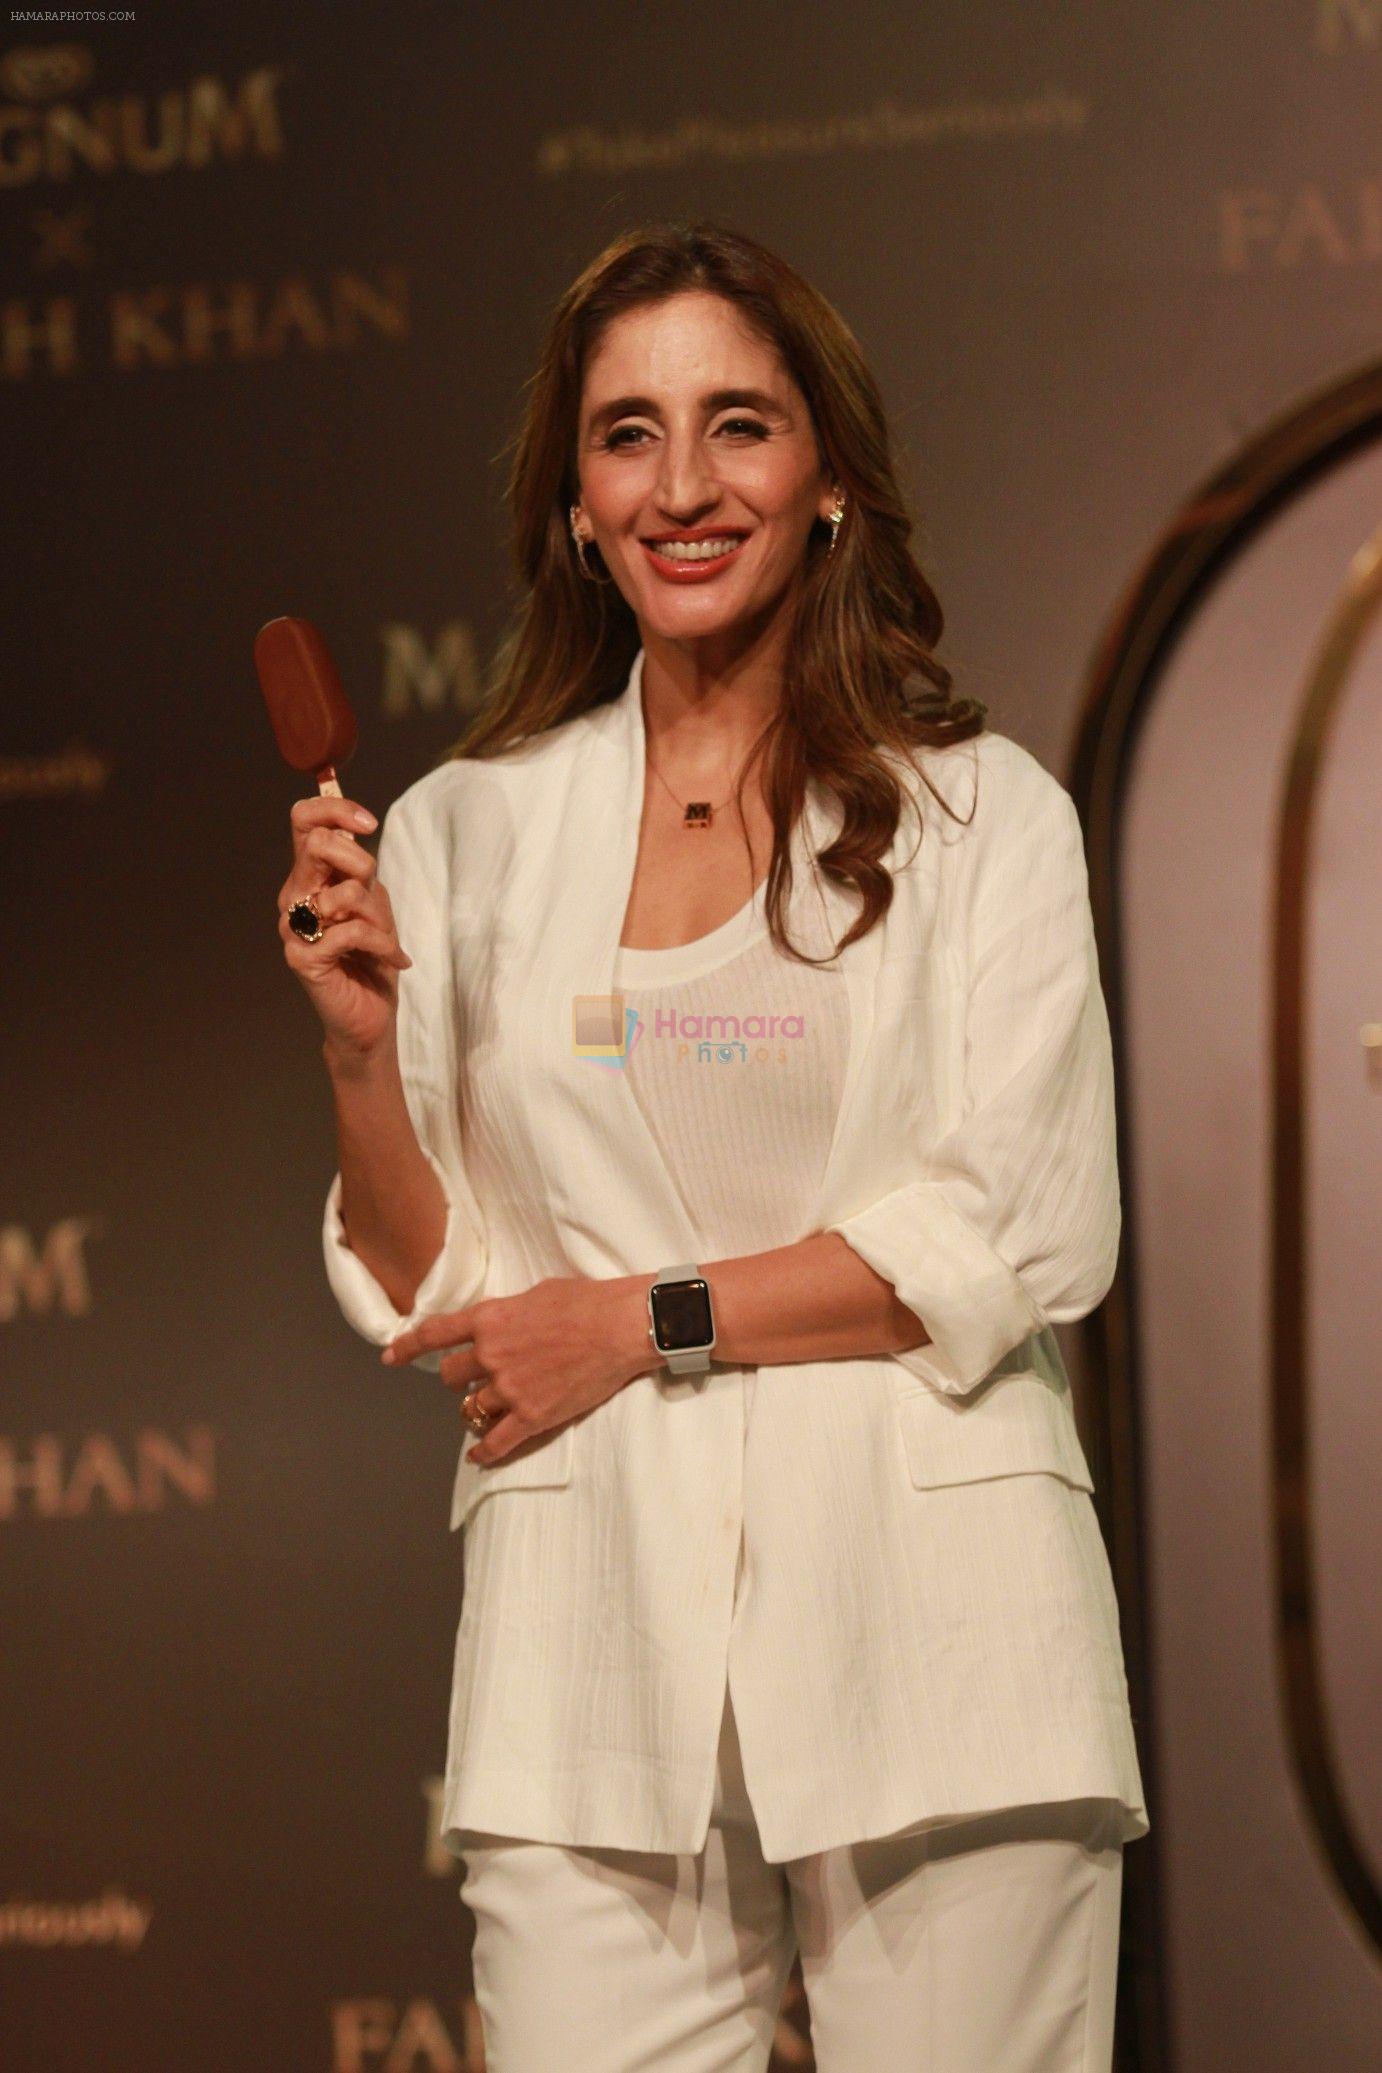 Farah Khan Ali unveil a collection of jewels in collaboration with Magnum on 24th April 2018